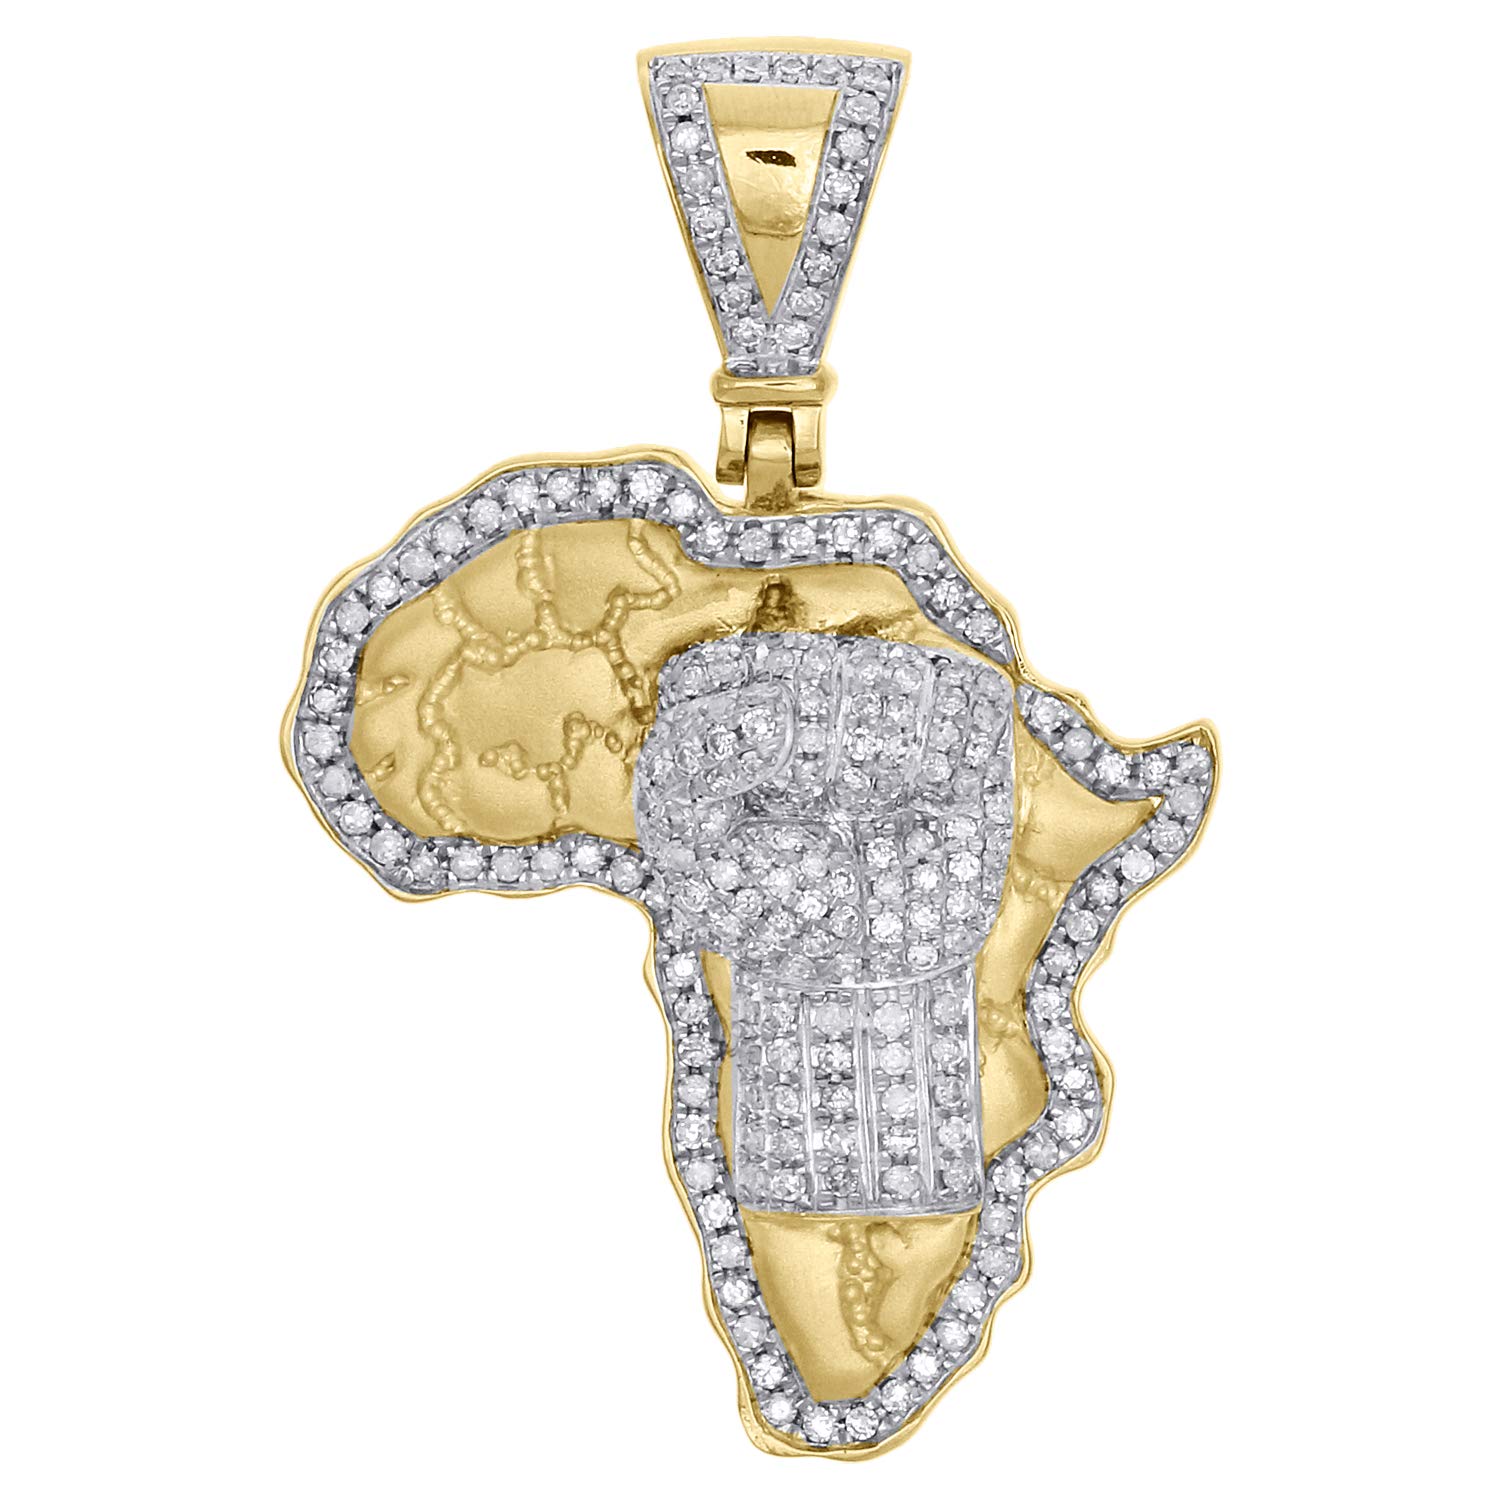 DTJEWELS 1 CT Diamond Pave Set Africa Map With Raised Fist Pendant 14K Yellow Gold Over